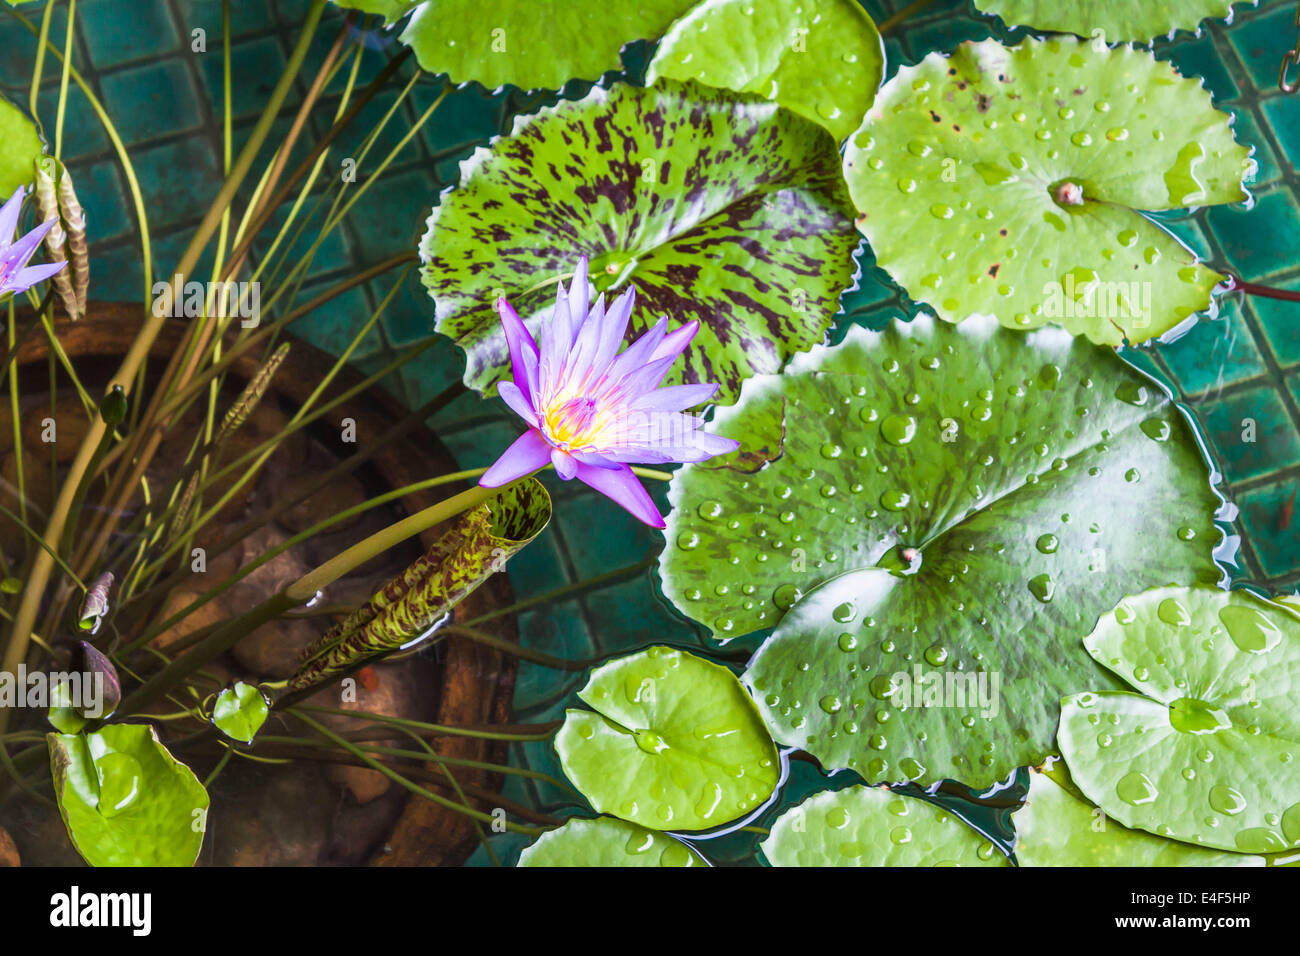 Floating violet water lily on green leaf Stock Photo